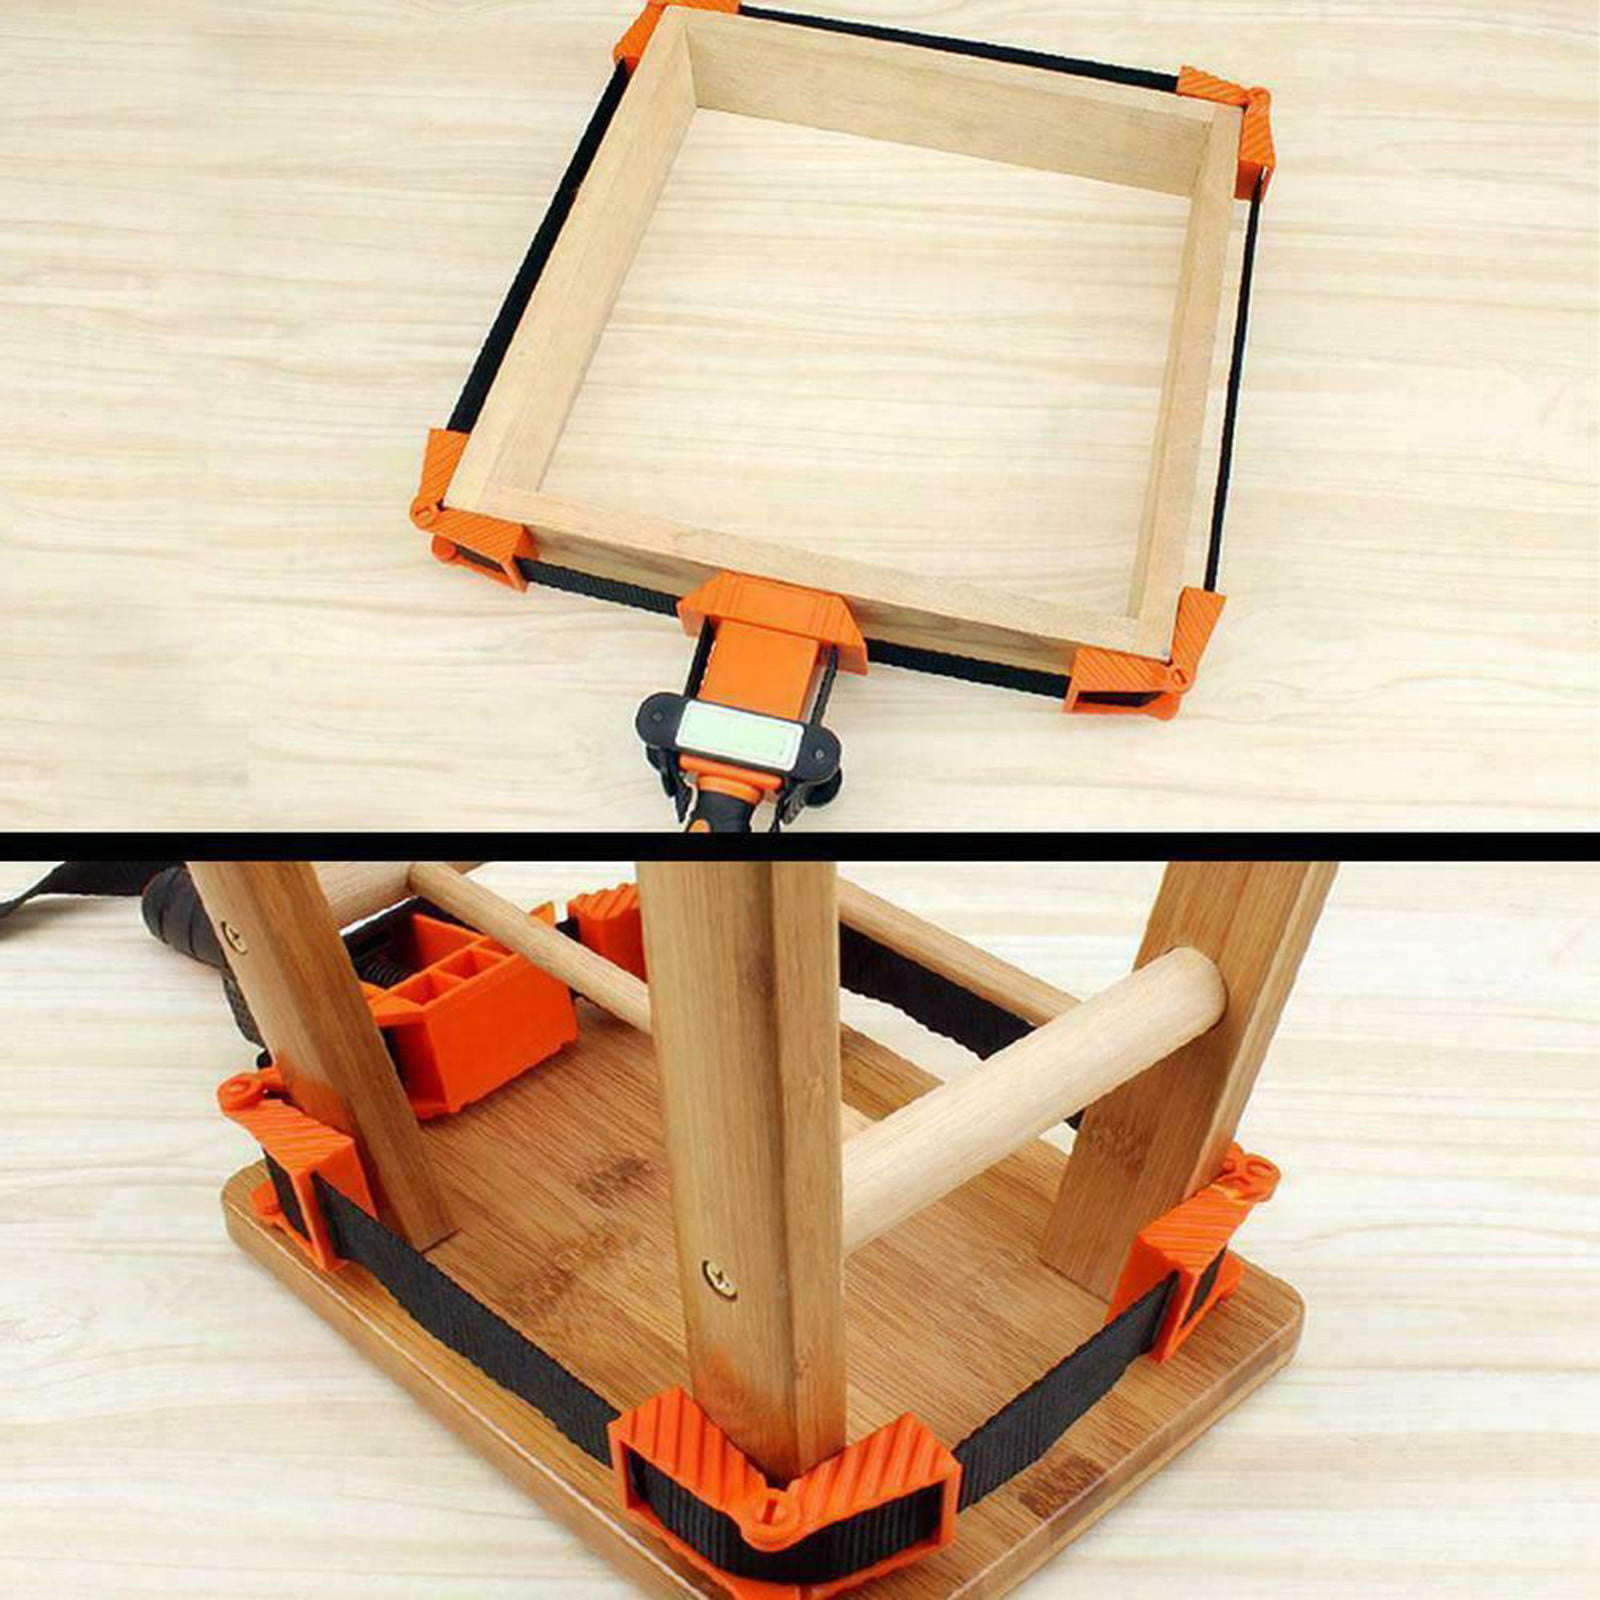 DERCLIVE Woodworking Band Strap Clamp Ratchet Band Clamp Miter Mitre Vise Tool for Work Pieces Picture Frame Cabinet